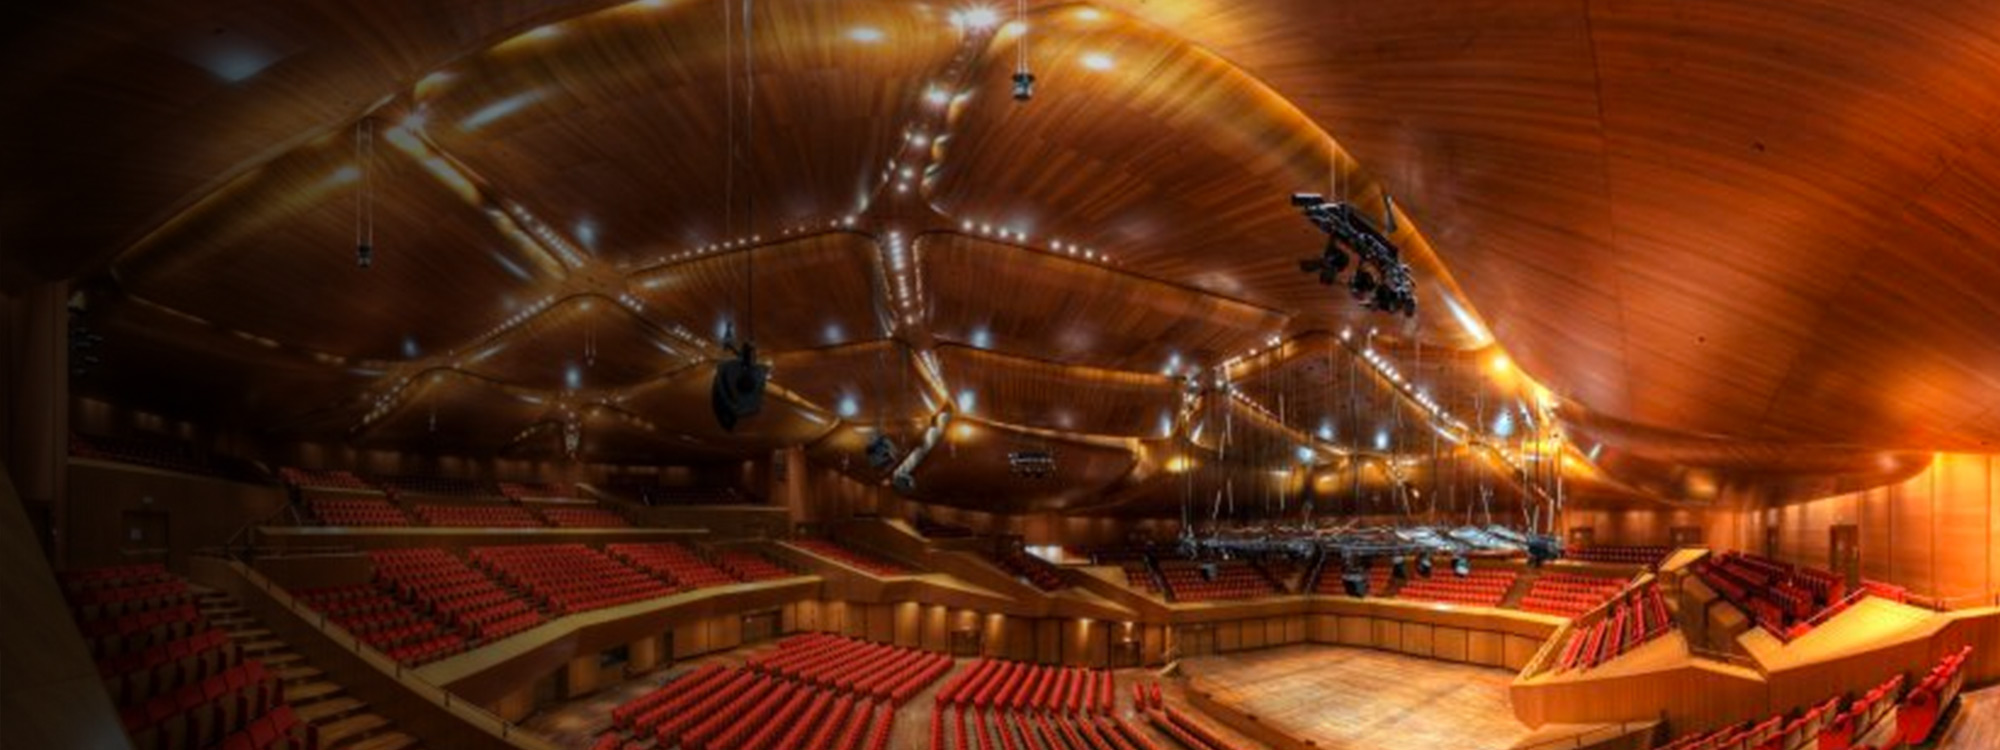 Poltrona Frau contract division: Auditoriums